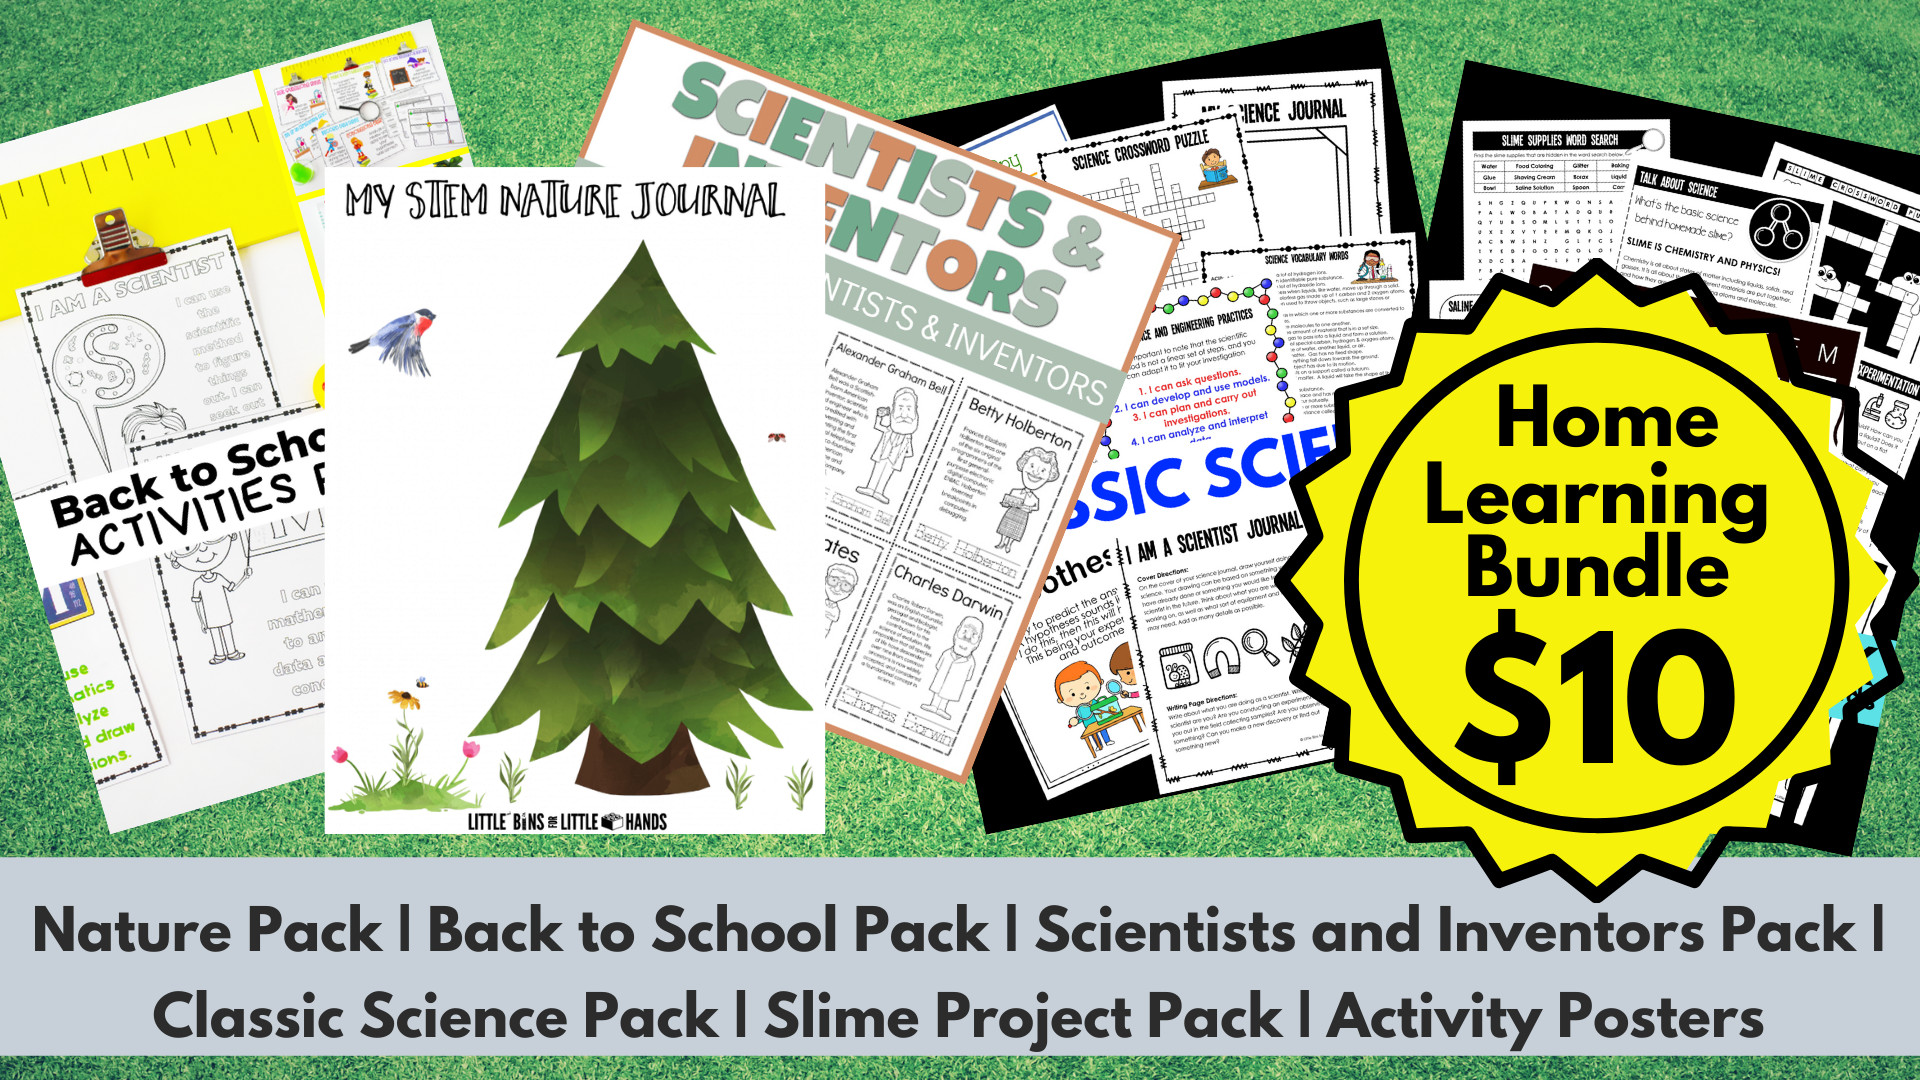 Home Learning Bundle Sales Page